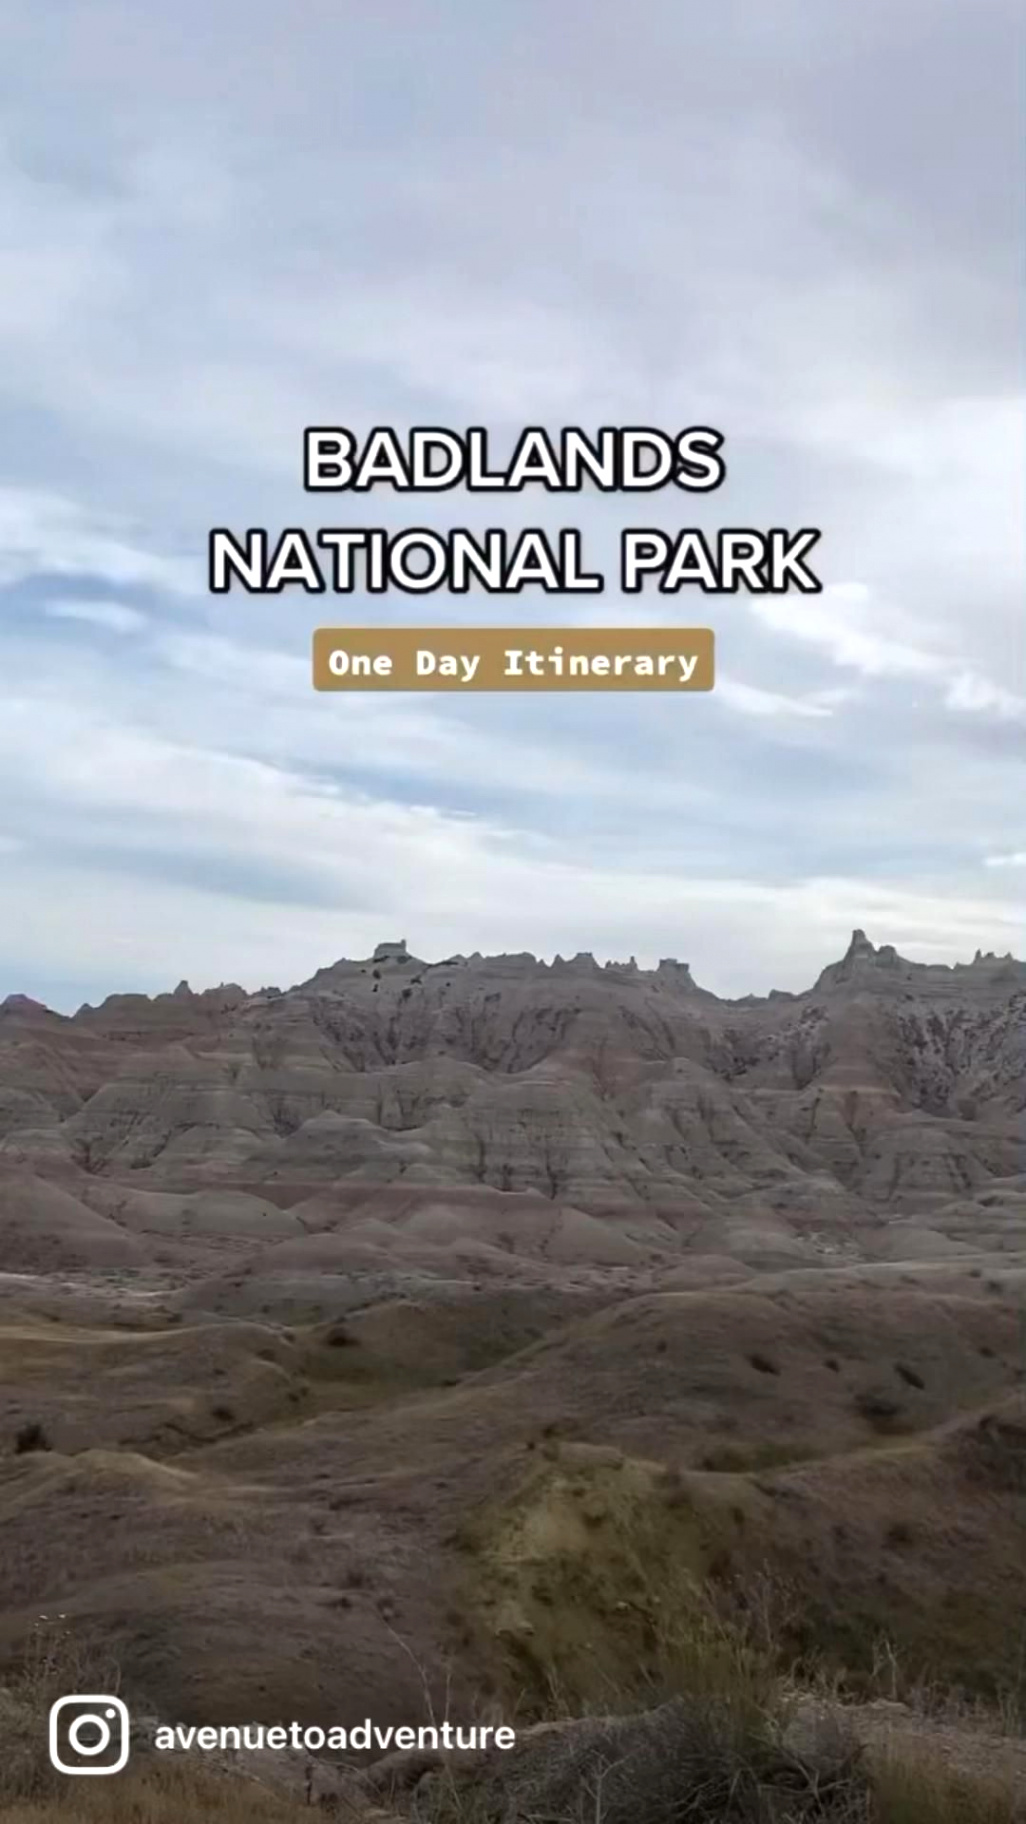 Cars and Truck Insurance Provider In Estes Park, Larimer County Dans Badlands National Park E Day Itinerary